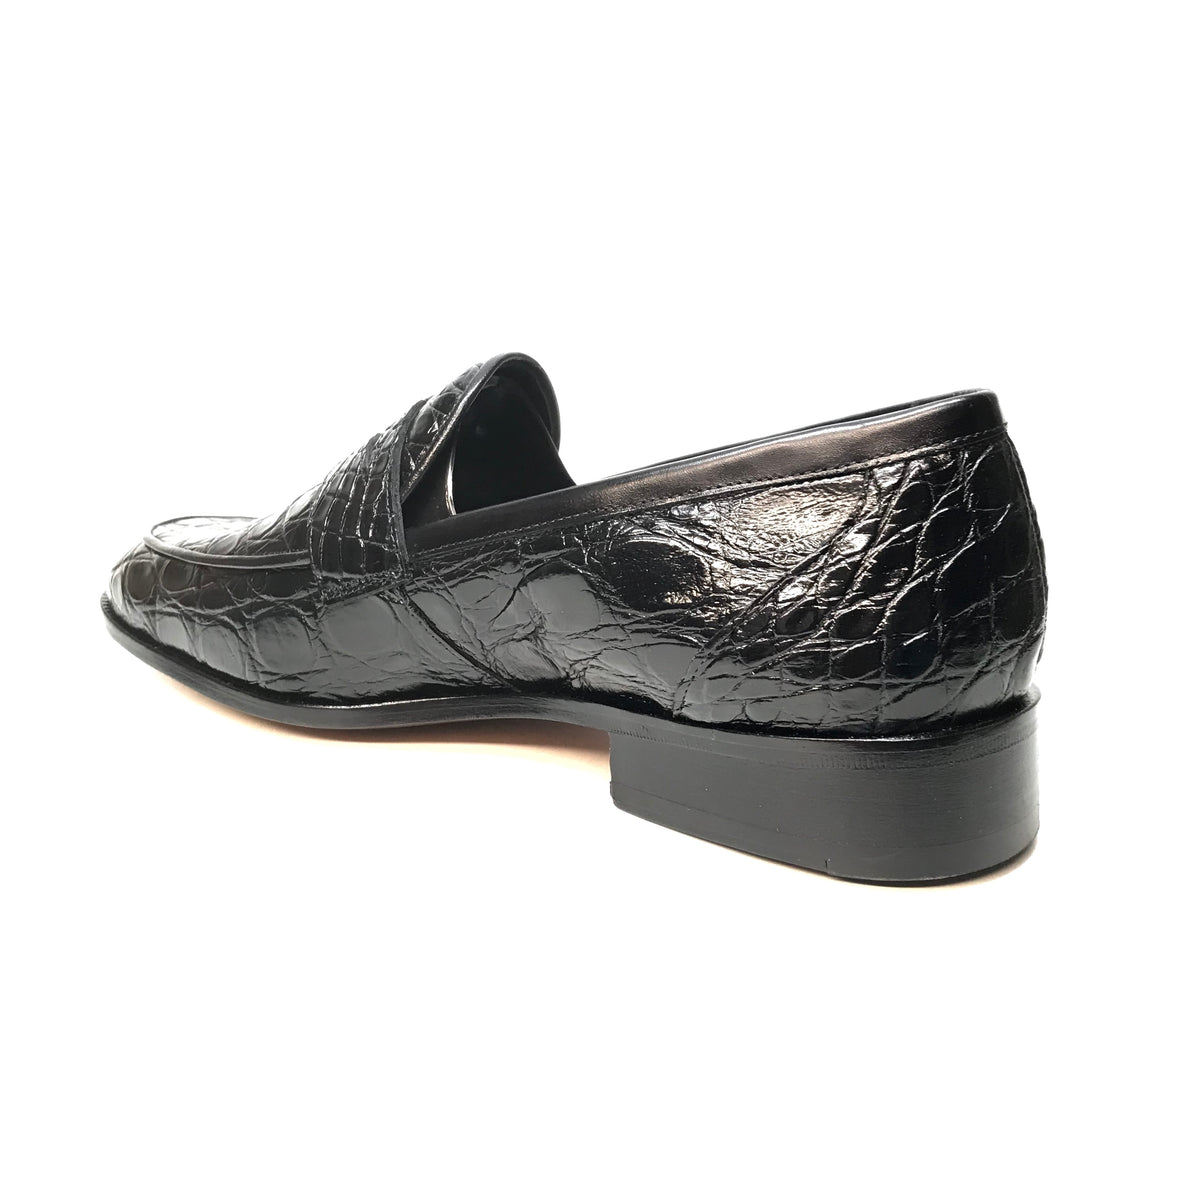 Mauri 4862 Black Crocodile Belly Penny Loafers - Dudes Boutique